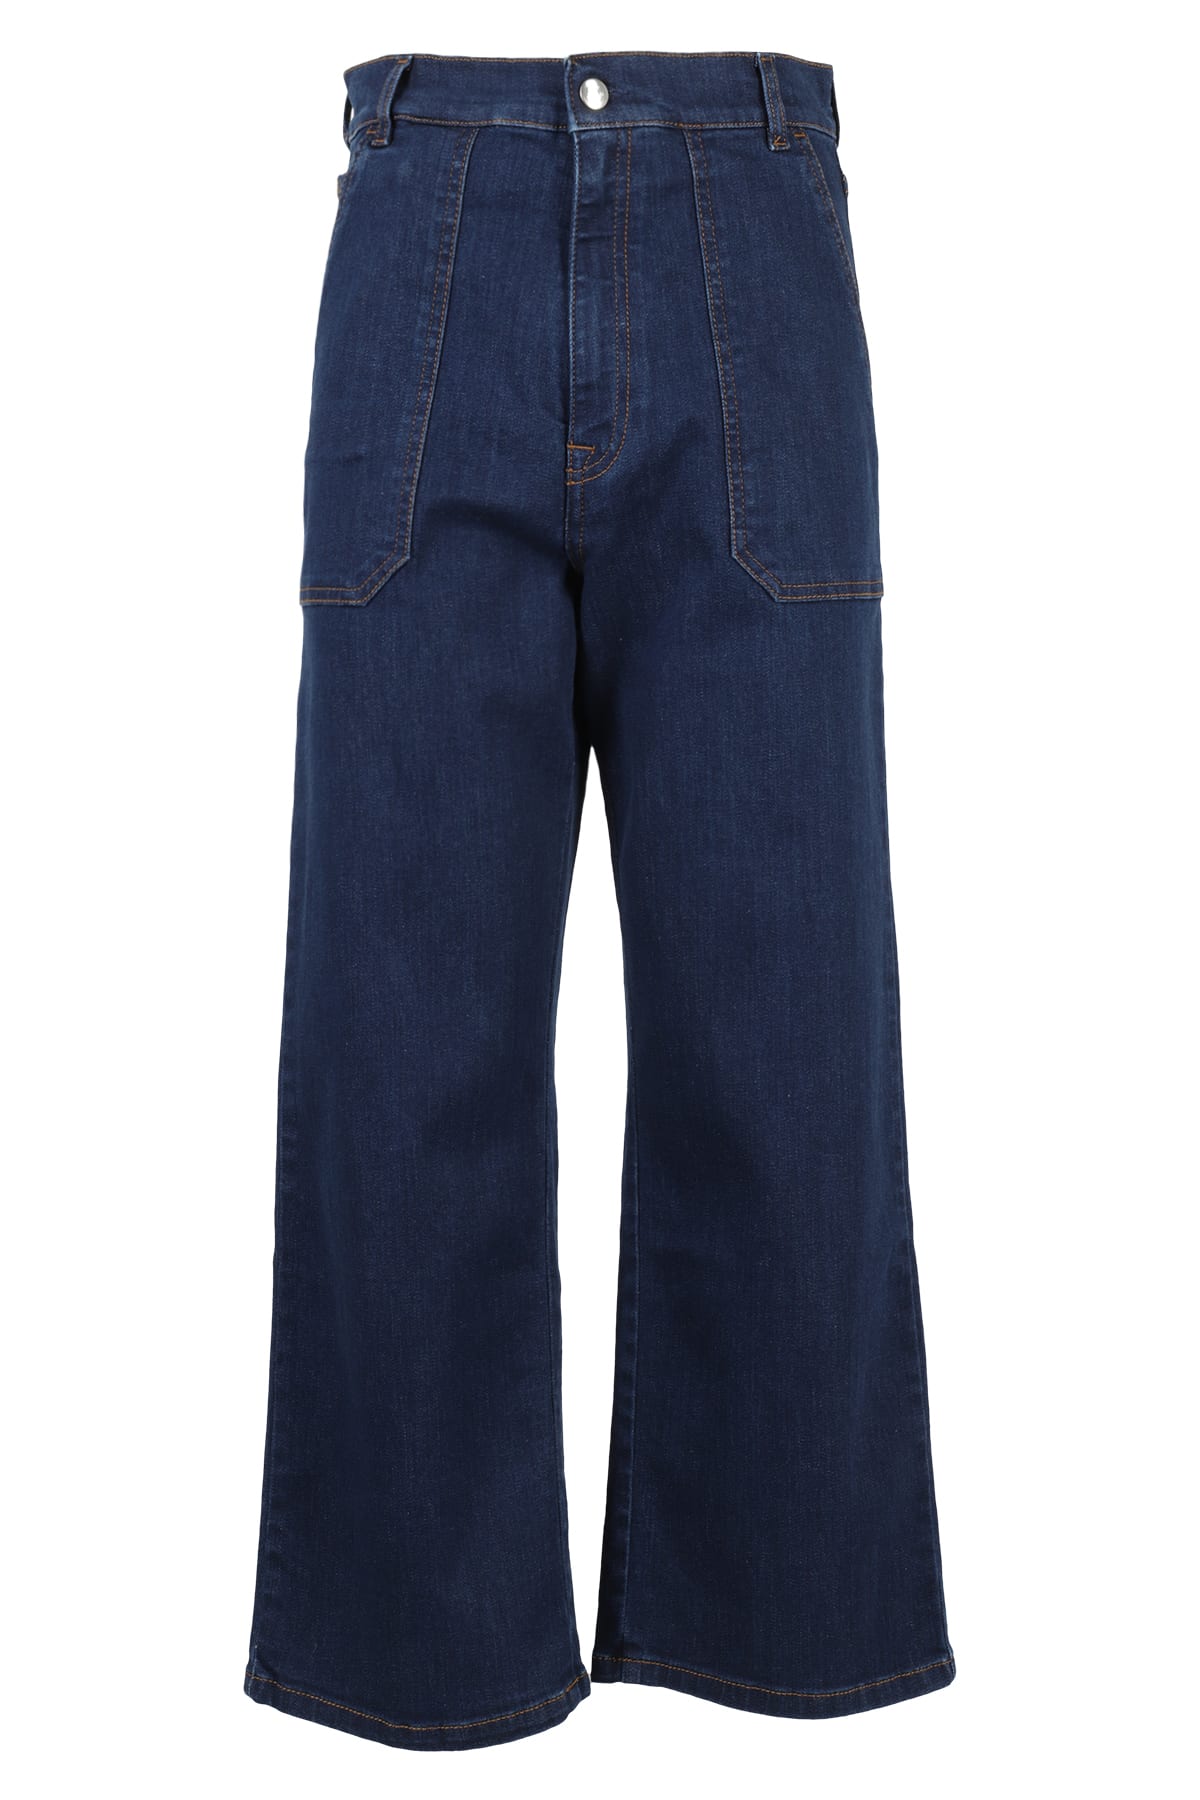 Fay Cottons JEANS